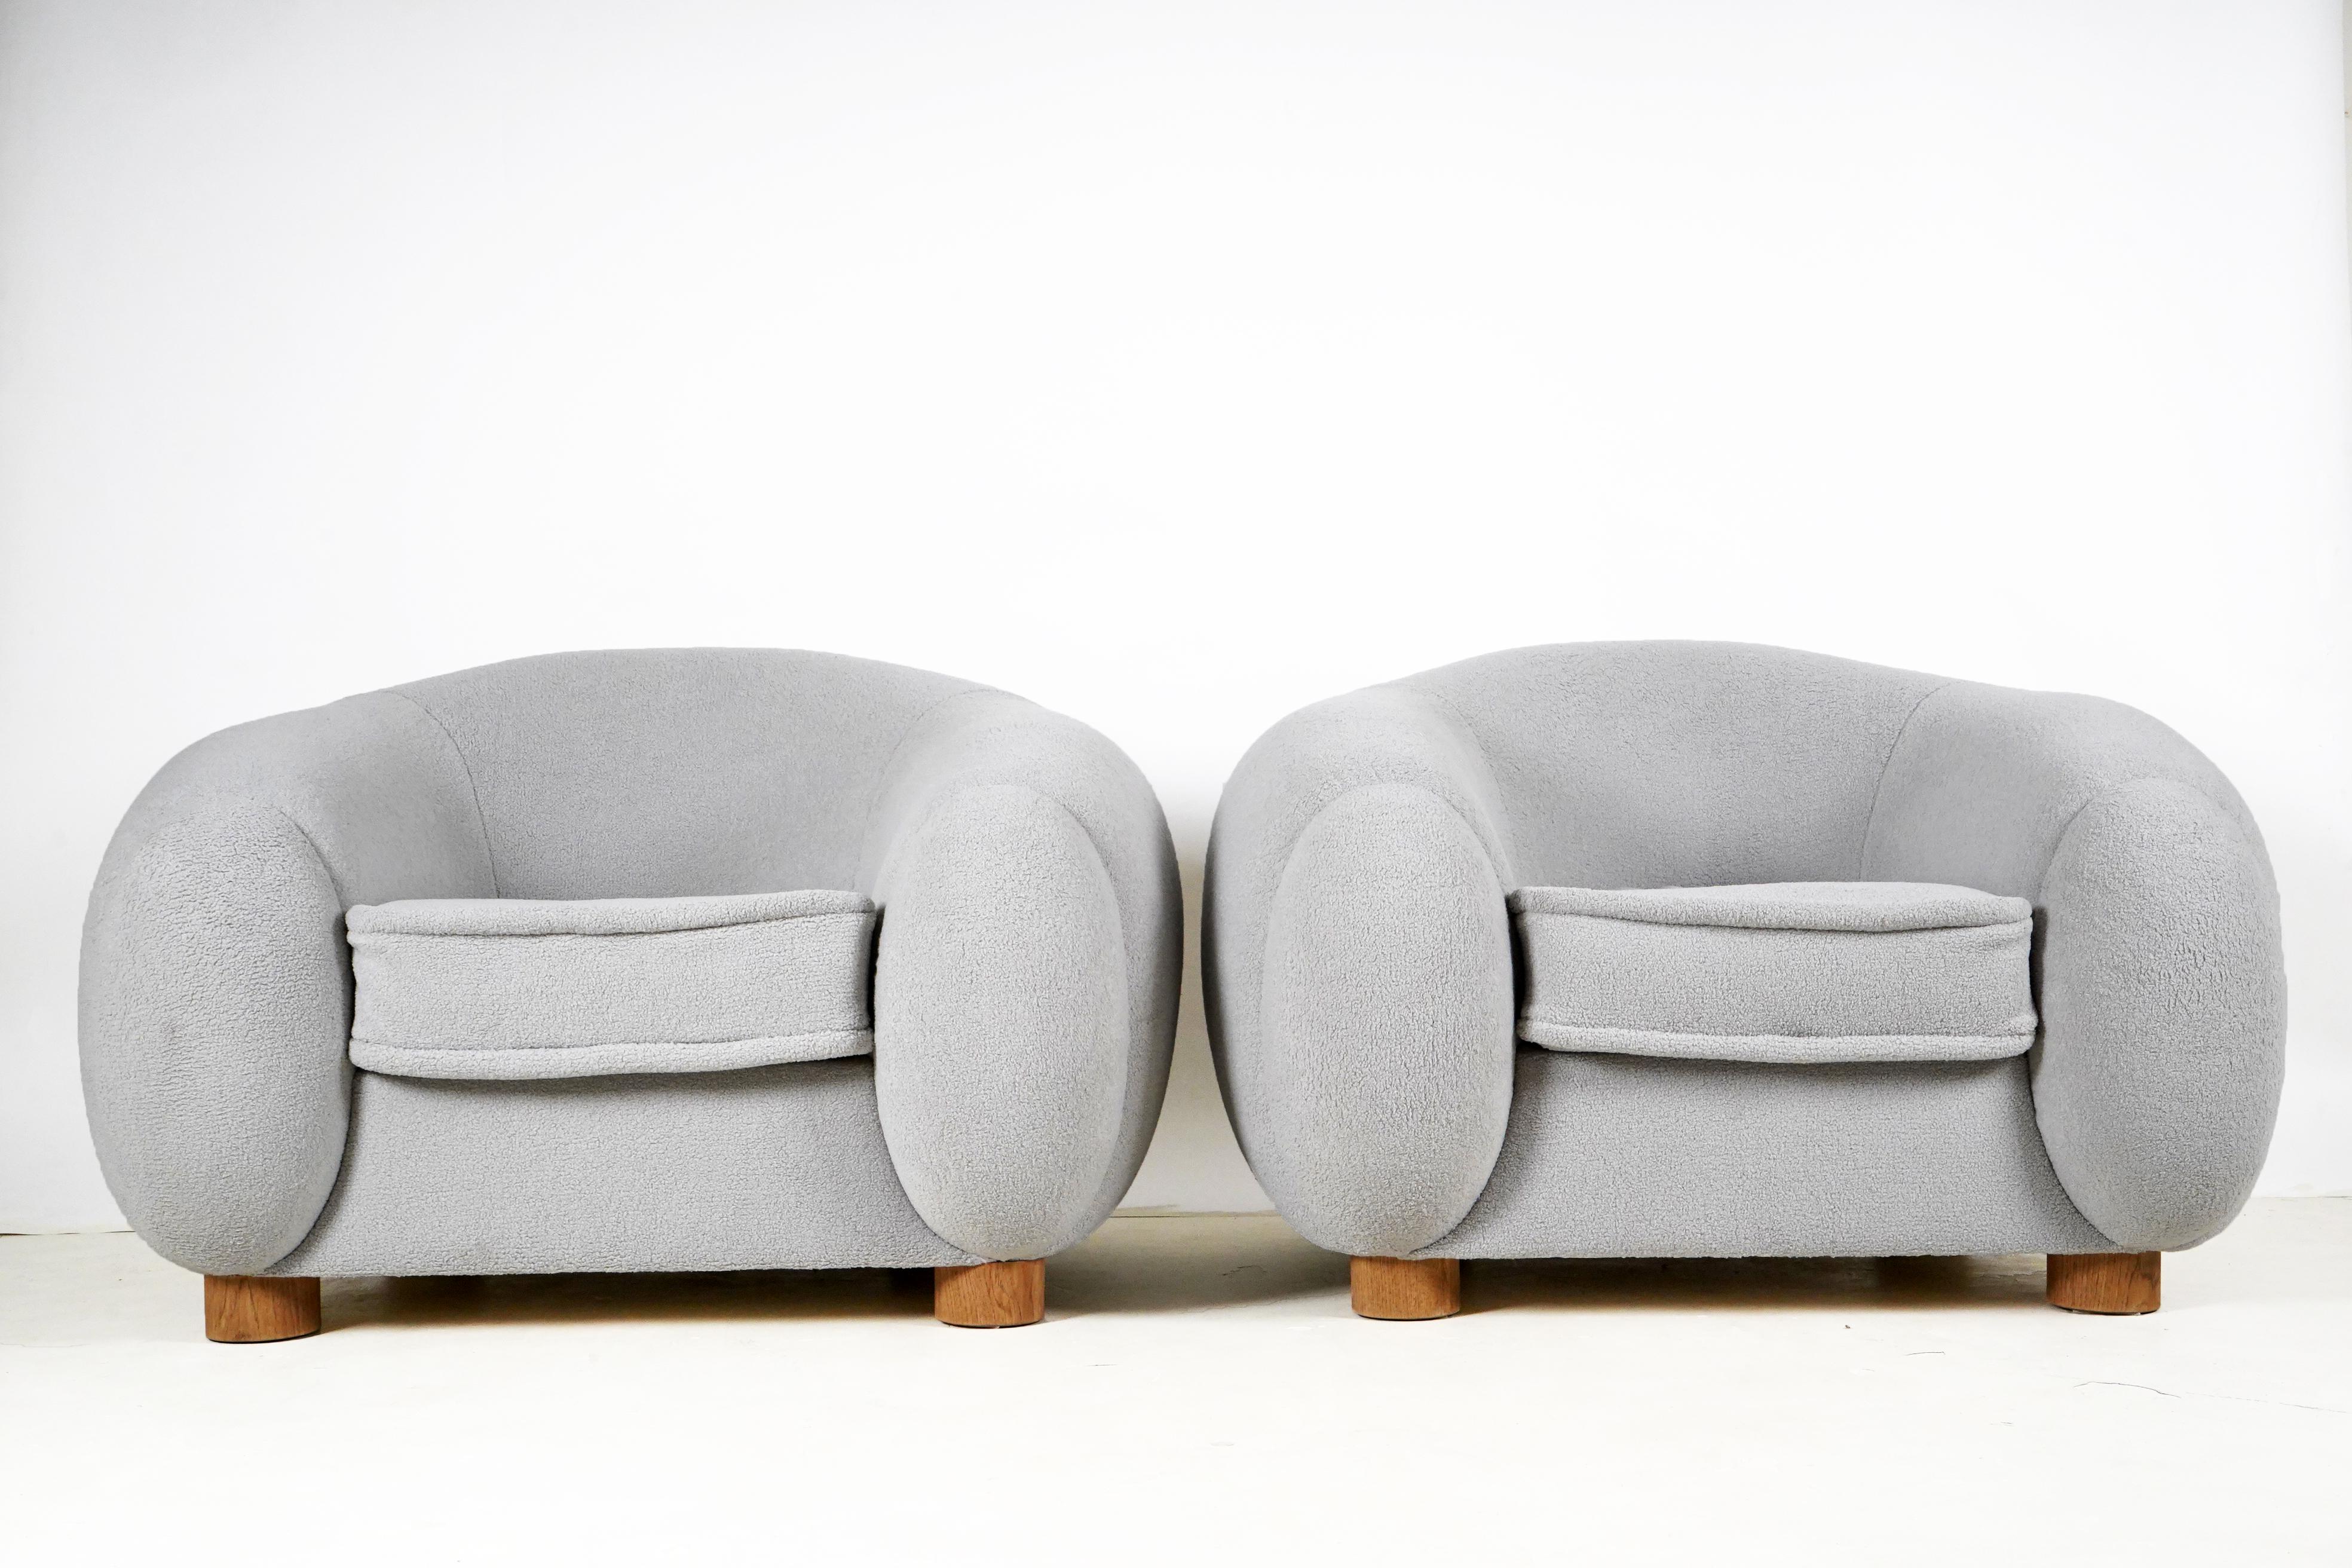 These splendidly comfortable lounge chairs pay homage to the Ours Polaires (polar bear) sofa and arm chairs French designer Jean Royere made for his mother's apartment in 1947. Despite their visual mass, they're lightweight and easy to move. The